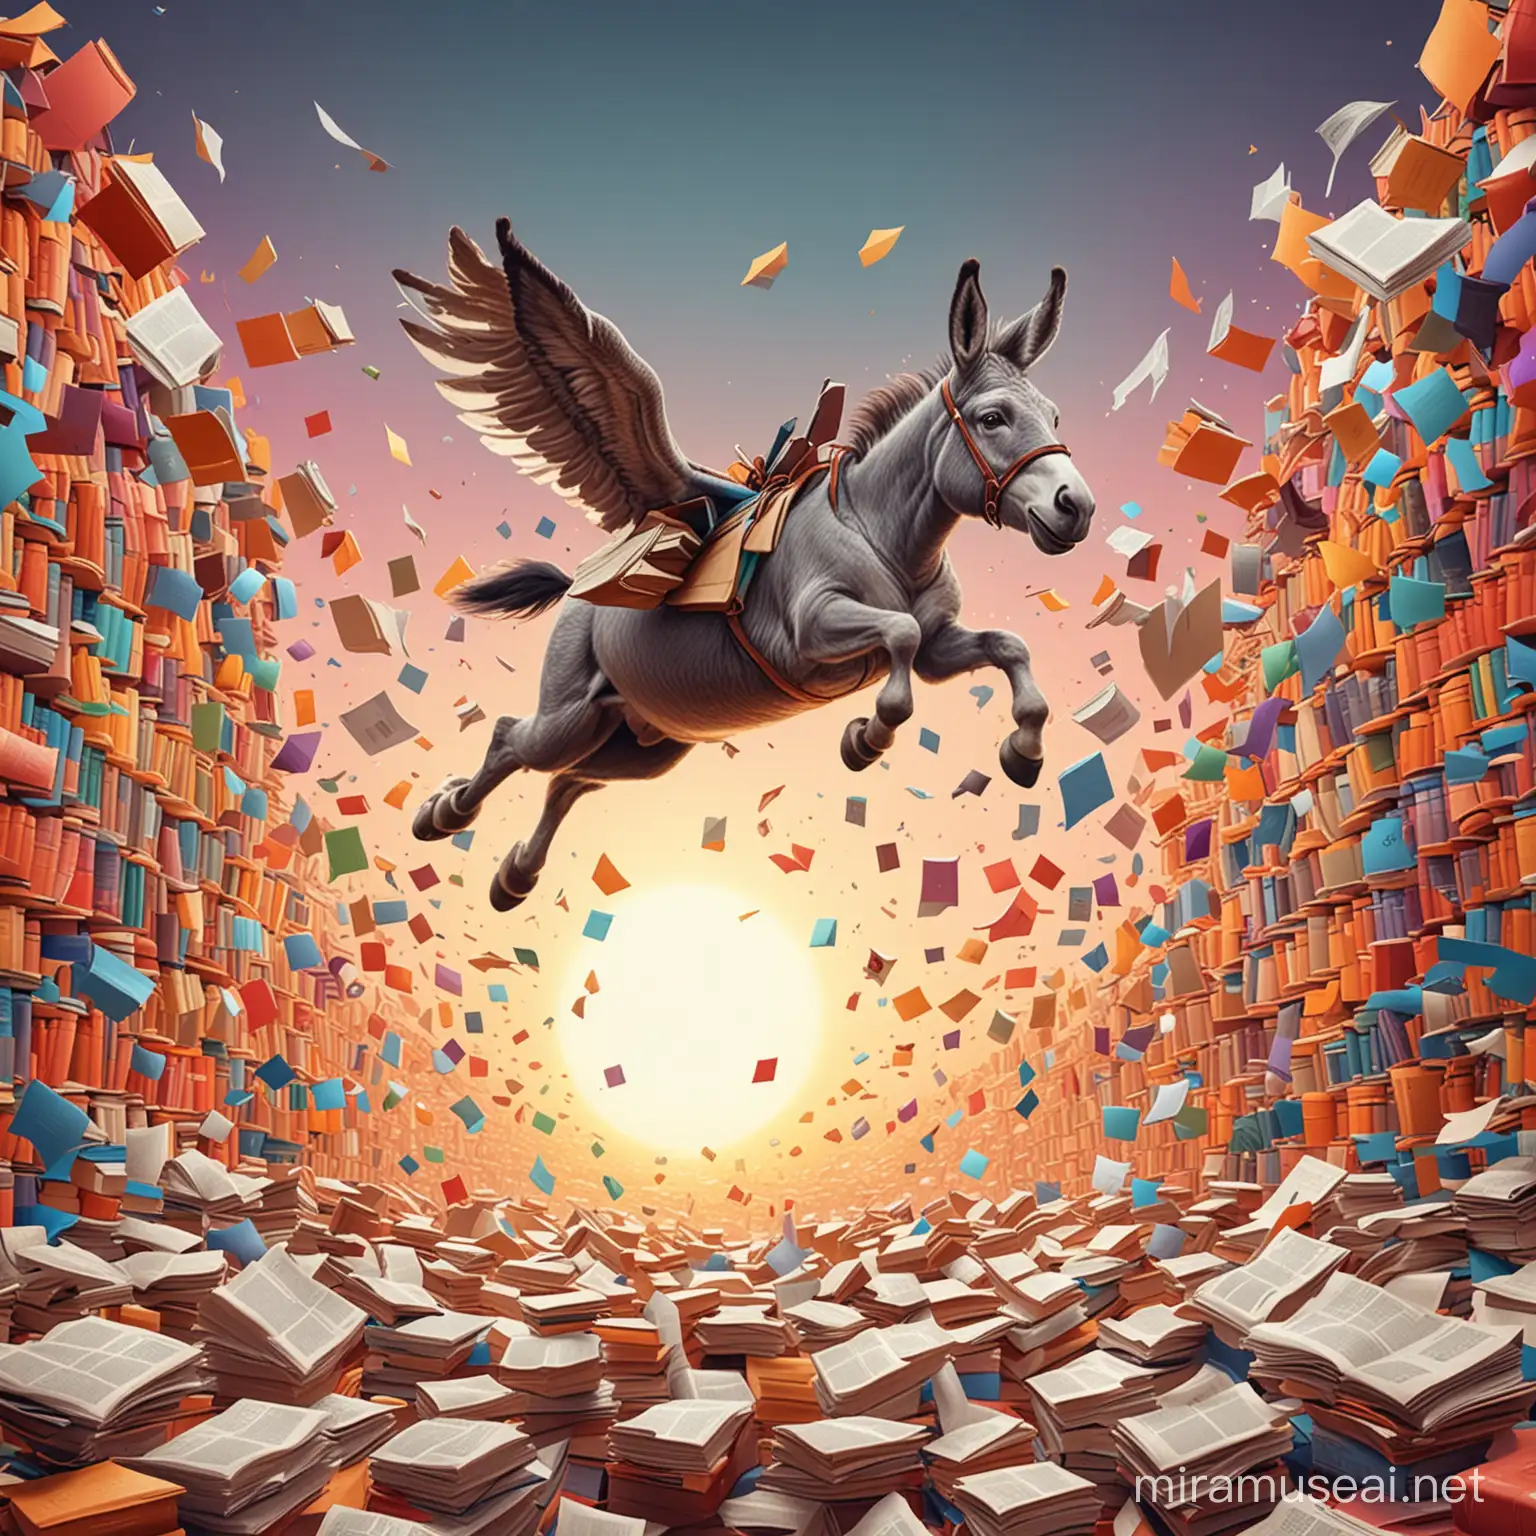 a flying donkey over a colorful land of books, newspapers, tablets and computers illustration style